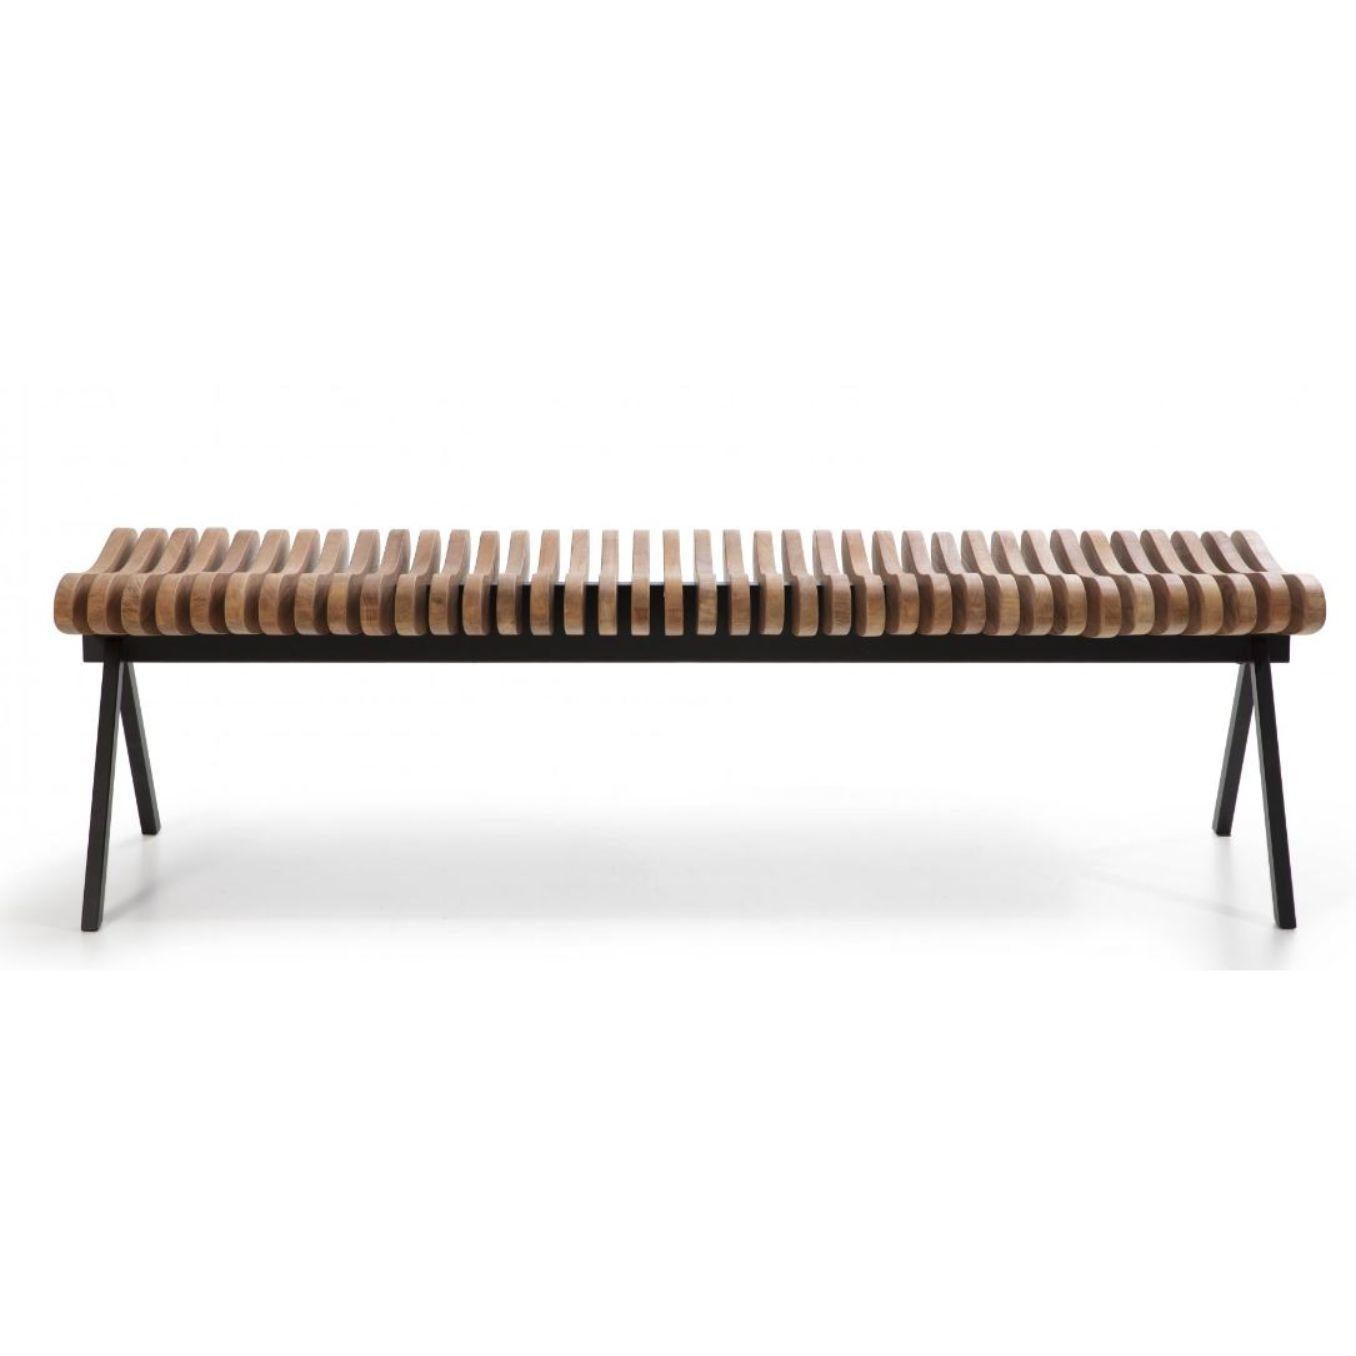 Small Perlude teak bench by Caroline Voet
Dimensions: 50 x 120 x H 43 cm
Materials: Teak
Also available in oak natural, seating oak black, seating walnut natural.

The Perlude benches are assembled from top grade FSC-labelled wood, solid oak